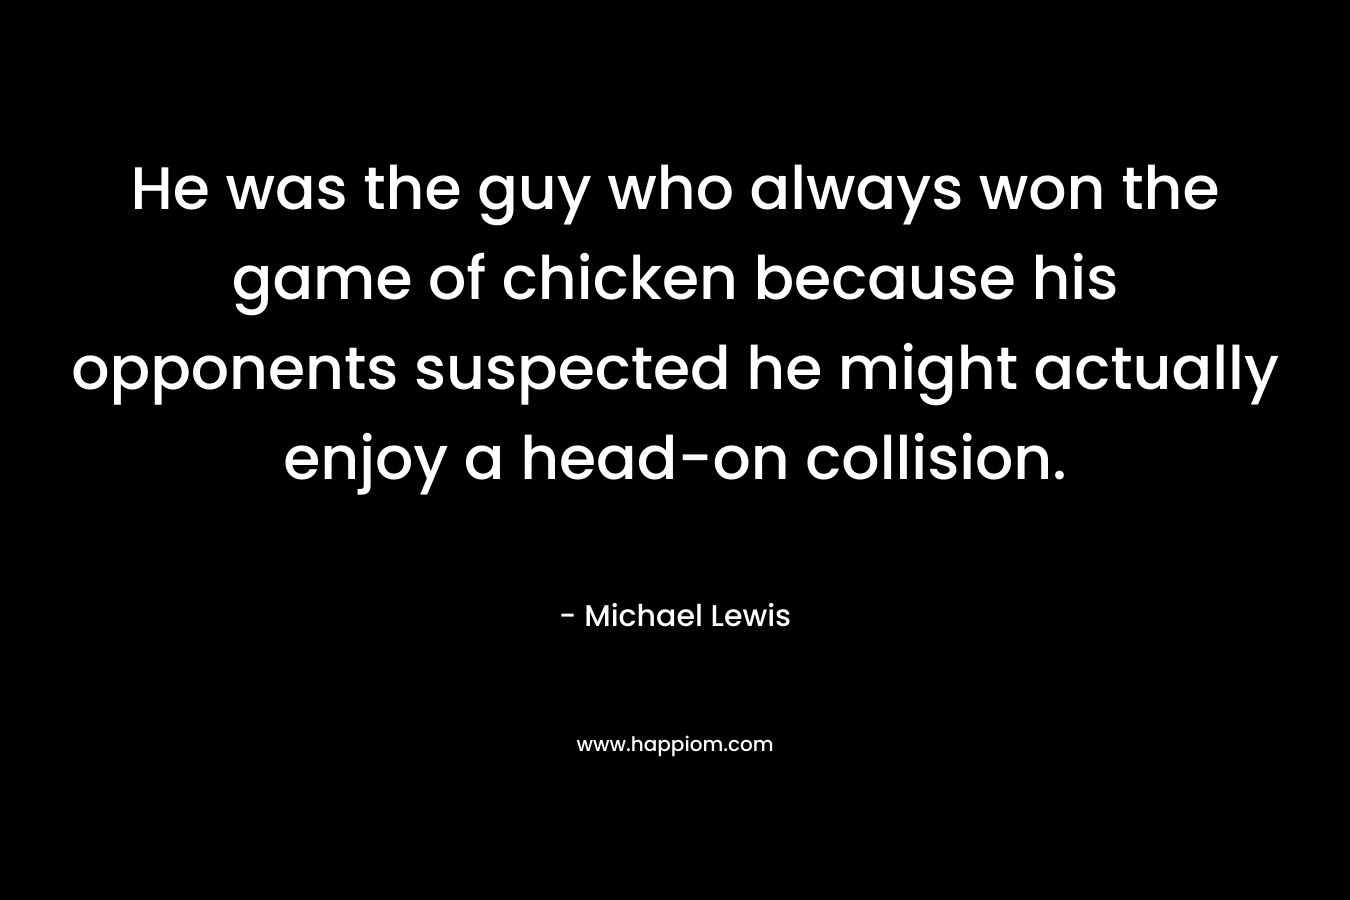 He was the guy who always won the game of chicken because his opponents suspected he might actually enjoy a head-on collision.